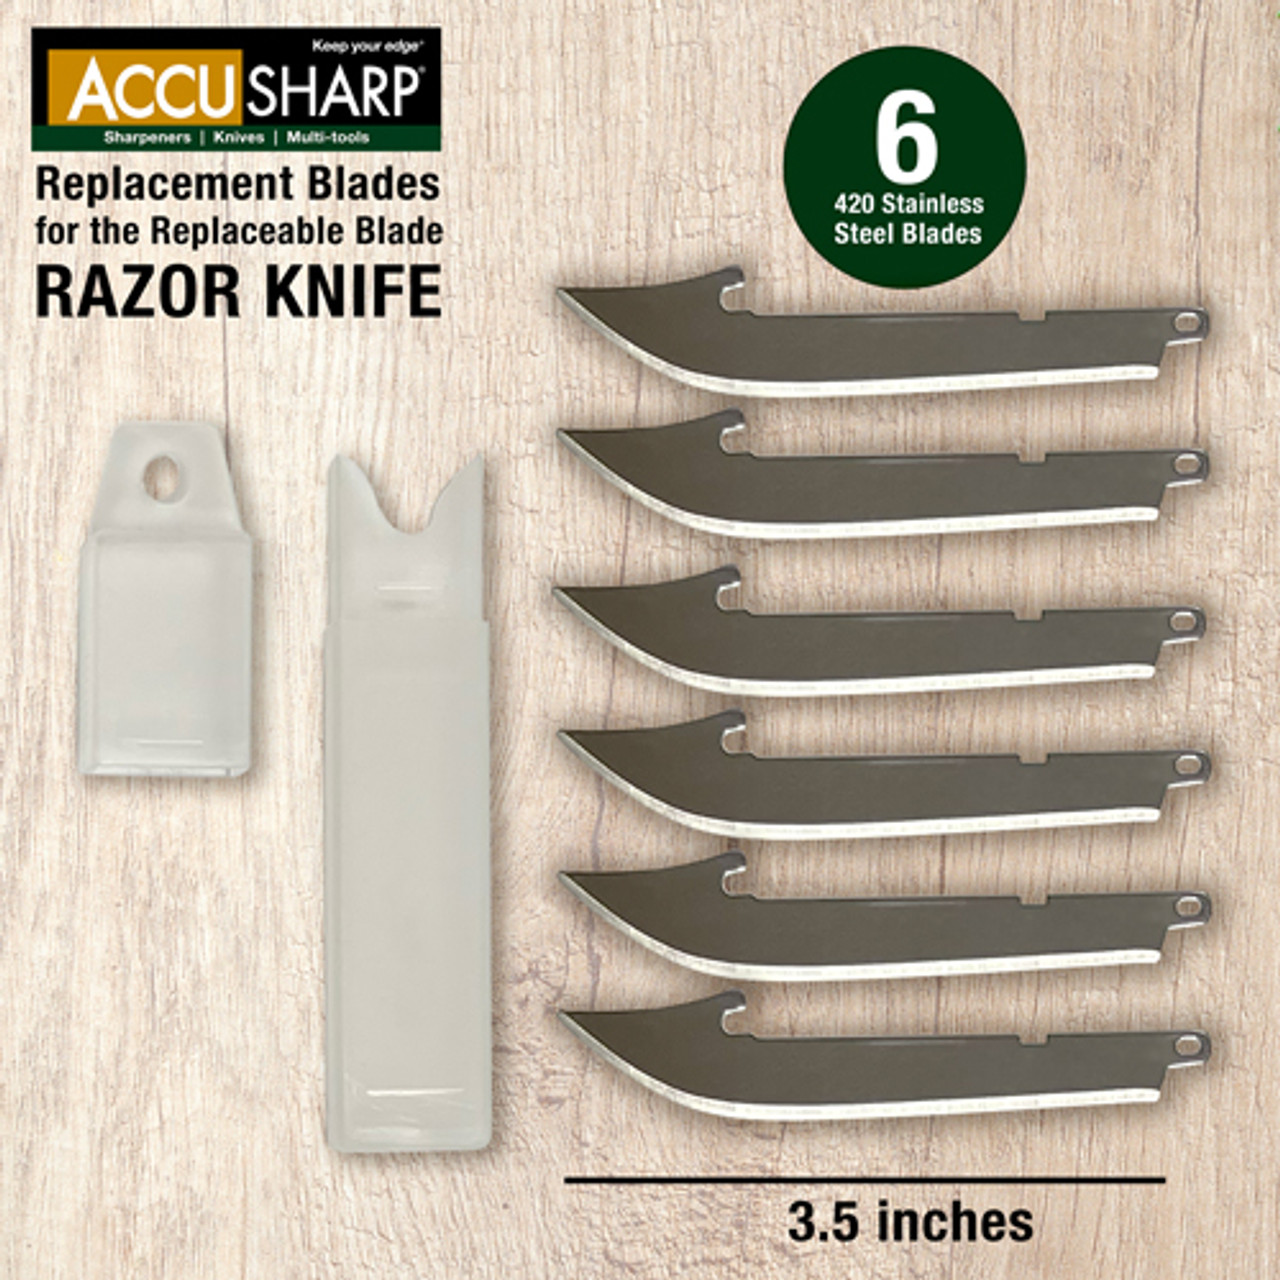 6-PACK REPLACEMENT BLADES FOR ACCUSHARP RAZOR KNIFE